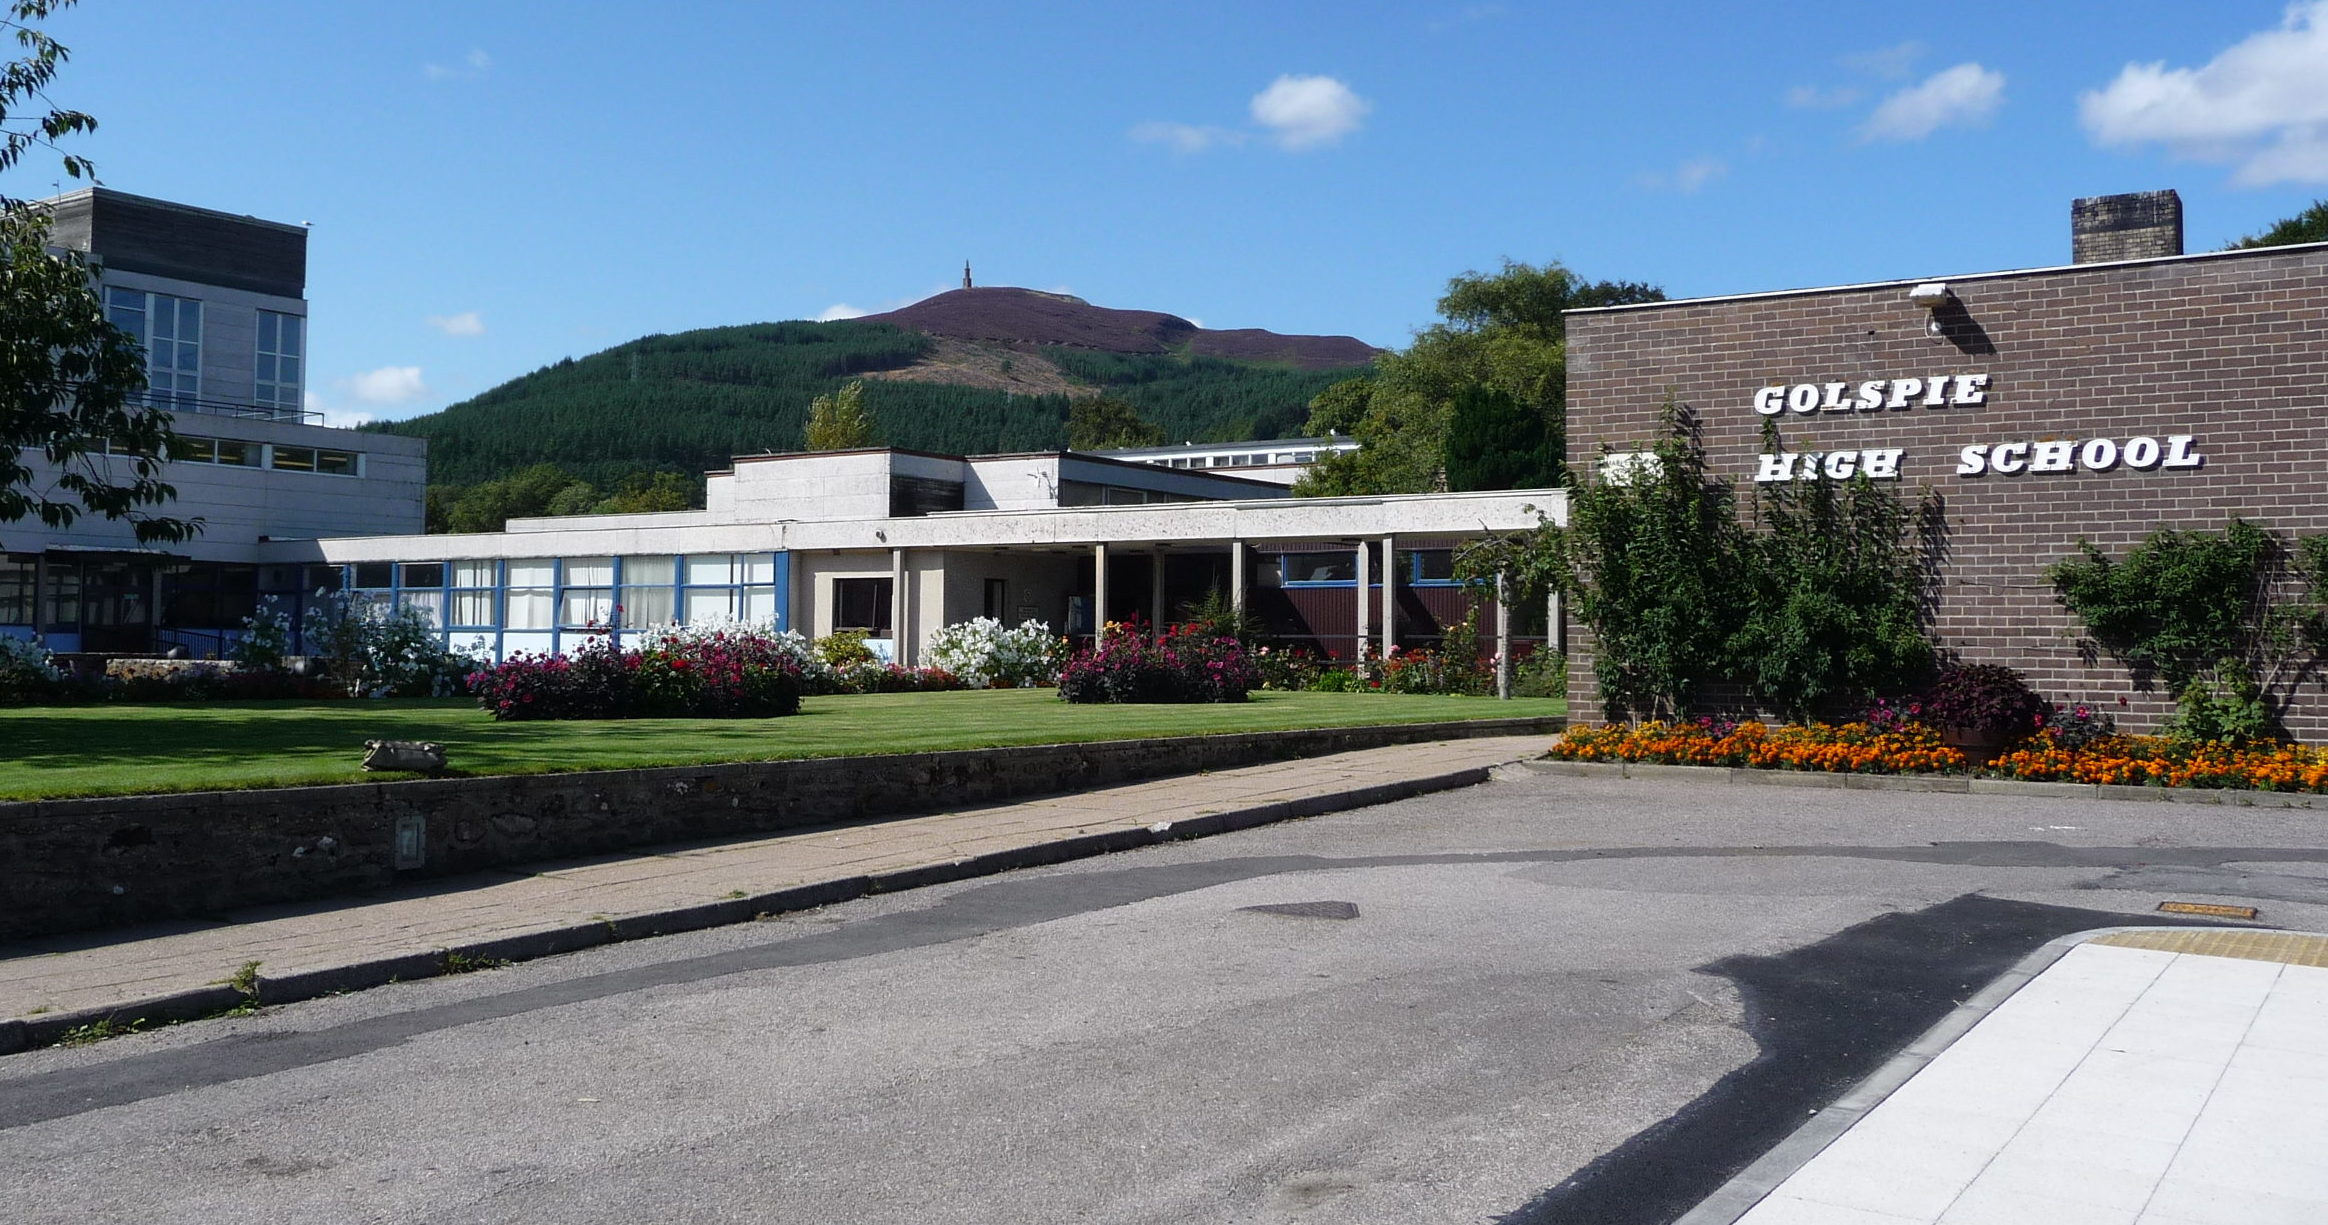 Golspie High School hopes the additional tuition will help pupils as they move into the world of employment.